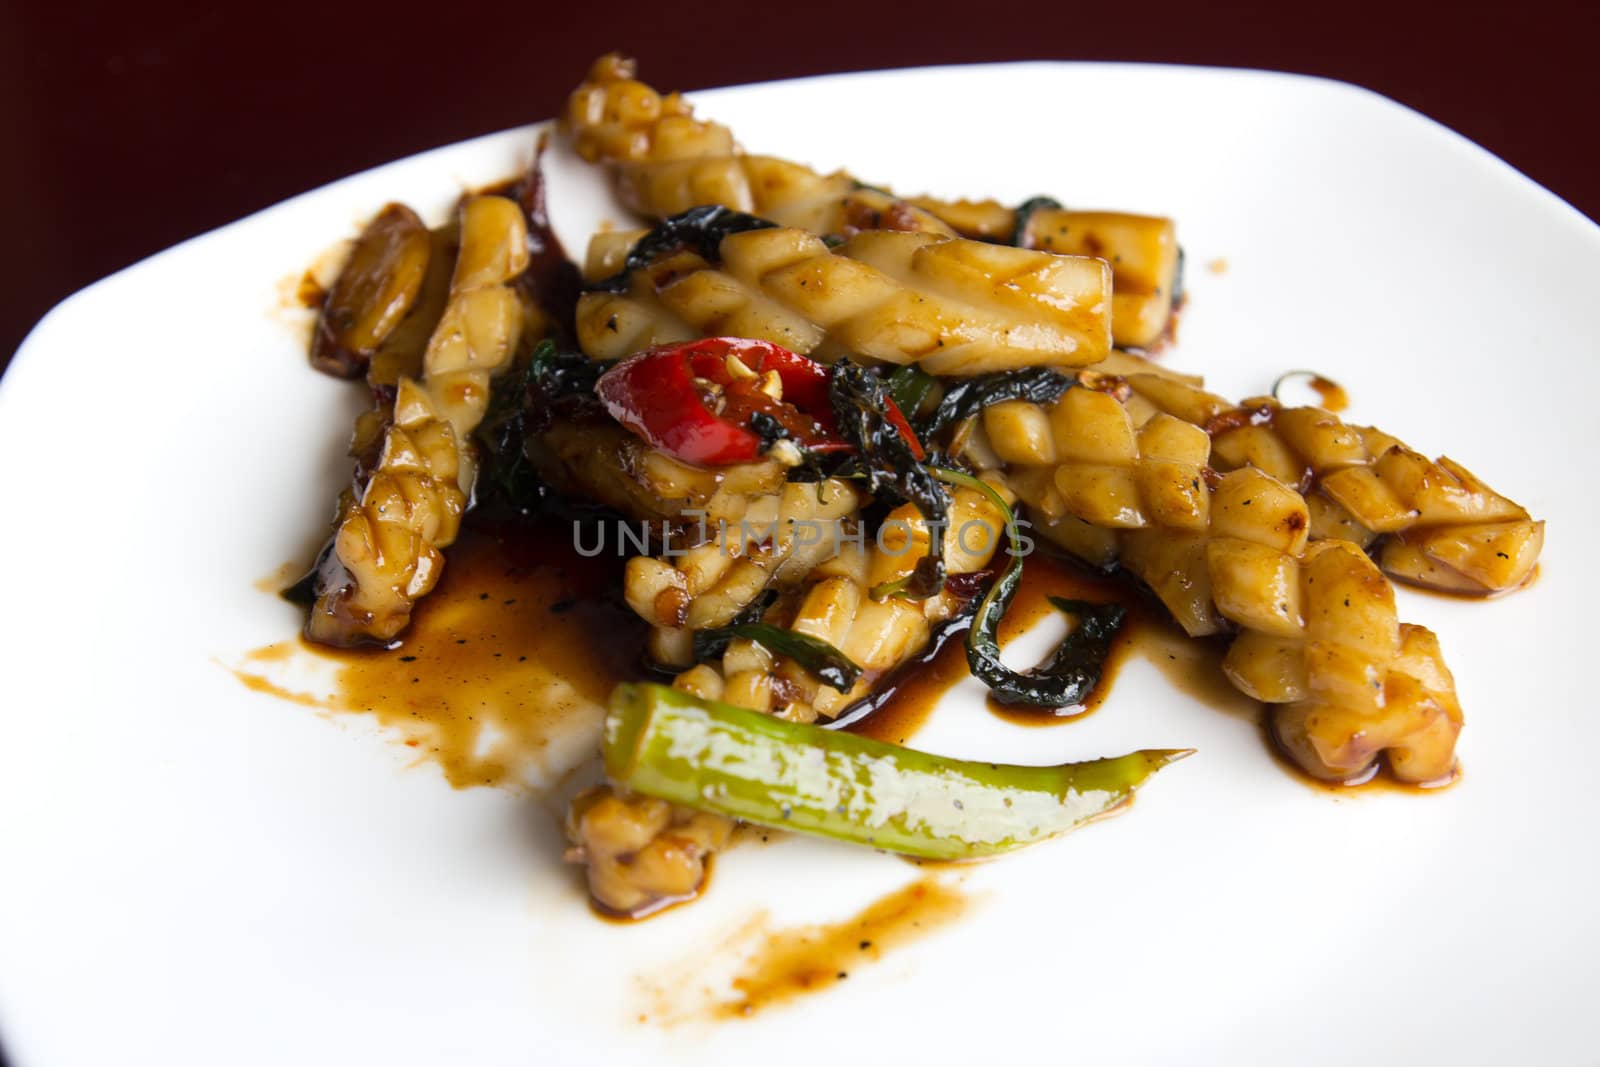 Chinese style chili fry squid with a soya sauce